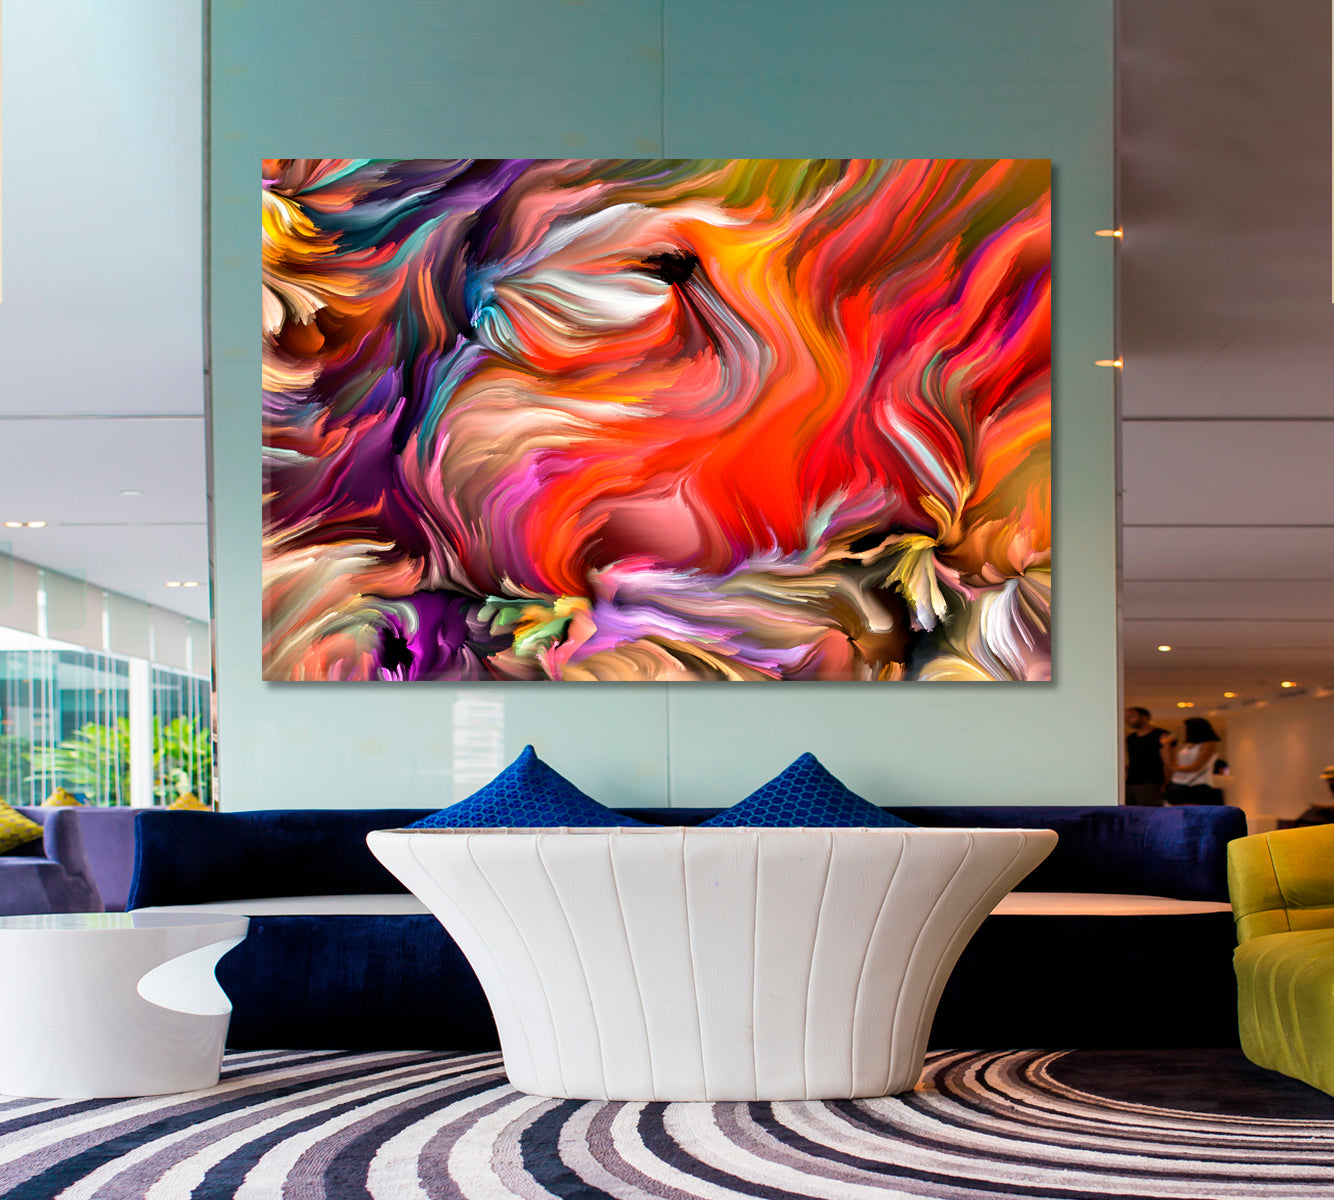 DYNAMIC COLORS FLOW Variegated Lines Abstract Design Abstract Art Print Artesty 1 panel 24" x 16" 